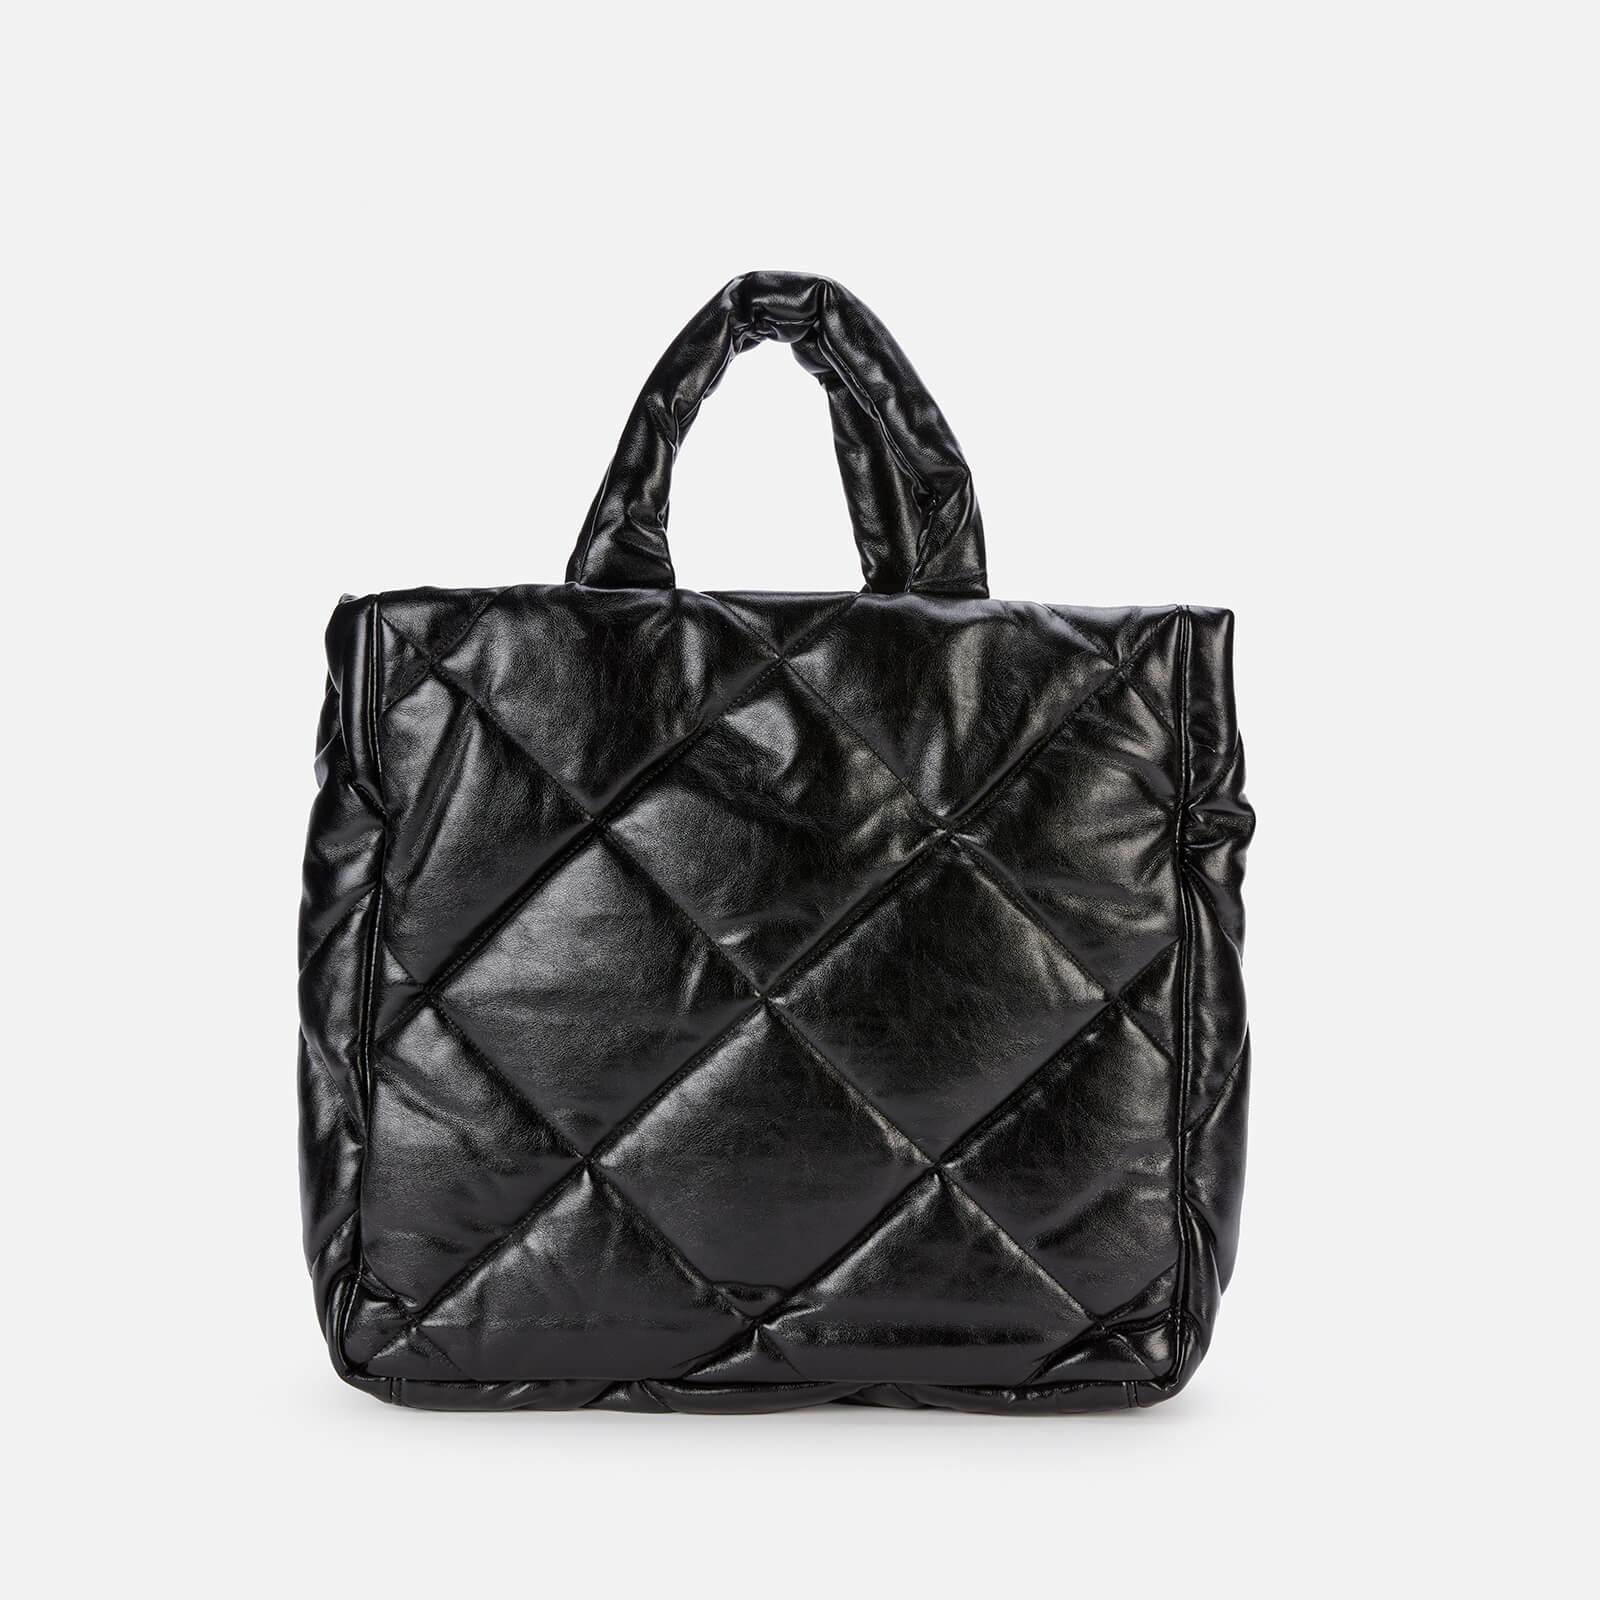 Stand Studio Assante Diamond Faux Leather Bag in Black - Lyst